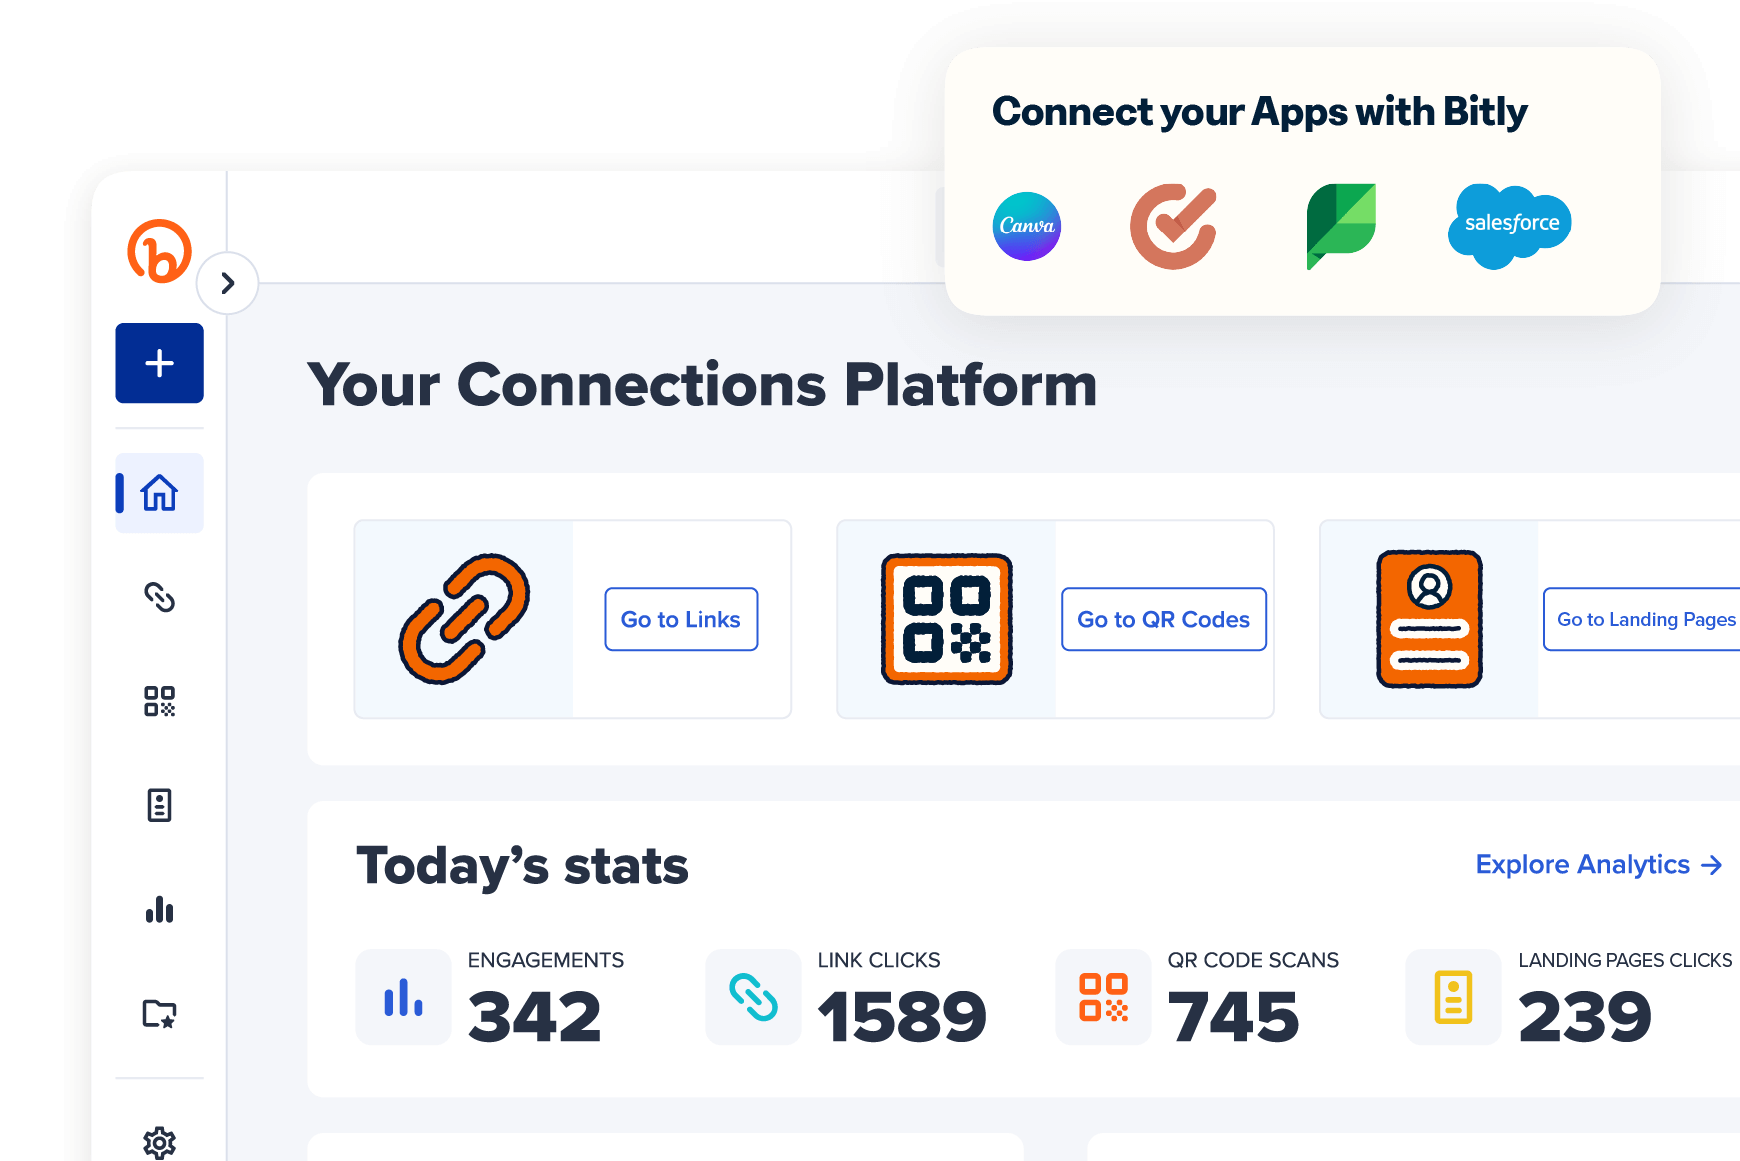 Bitly dashboard with a callout for connecting apps to Bitly